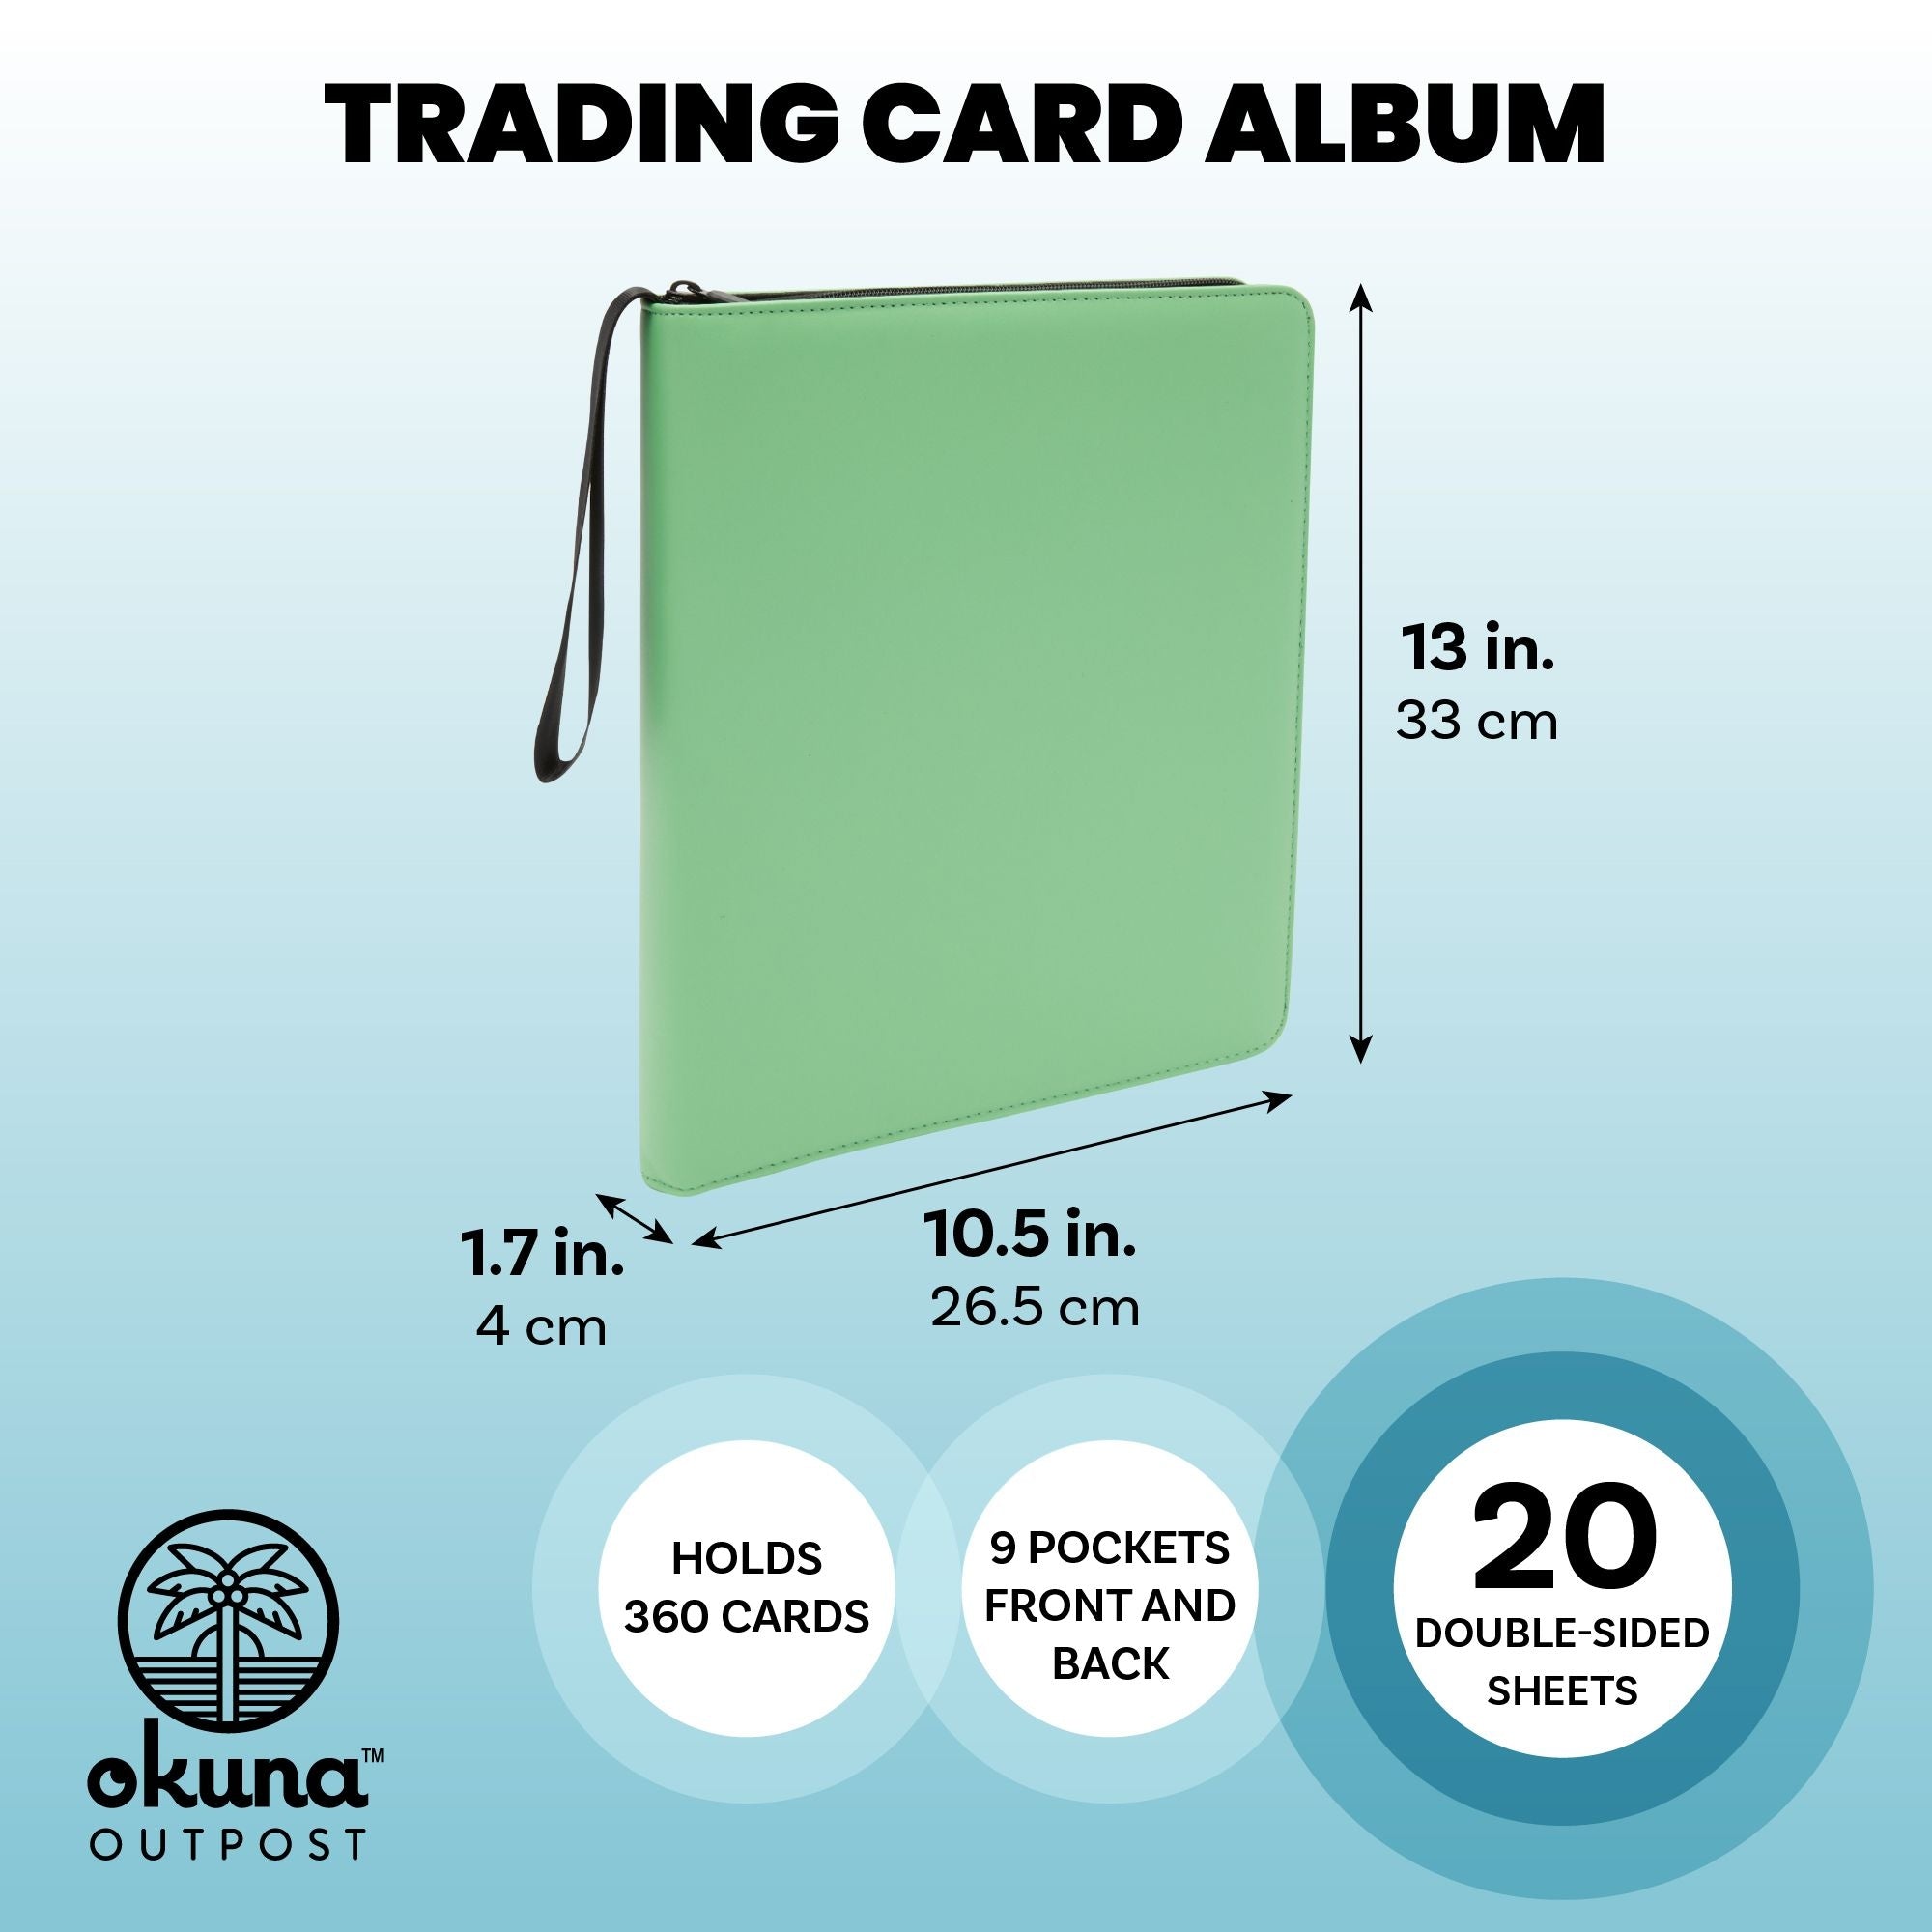 Okuna Outpost 9-pocket Trading Card Binder With Zipper (yellow, 10